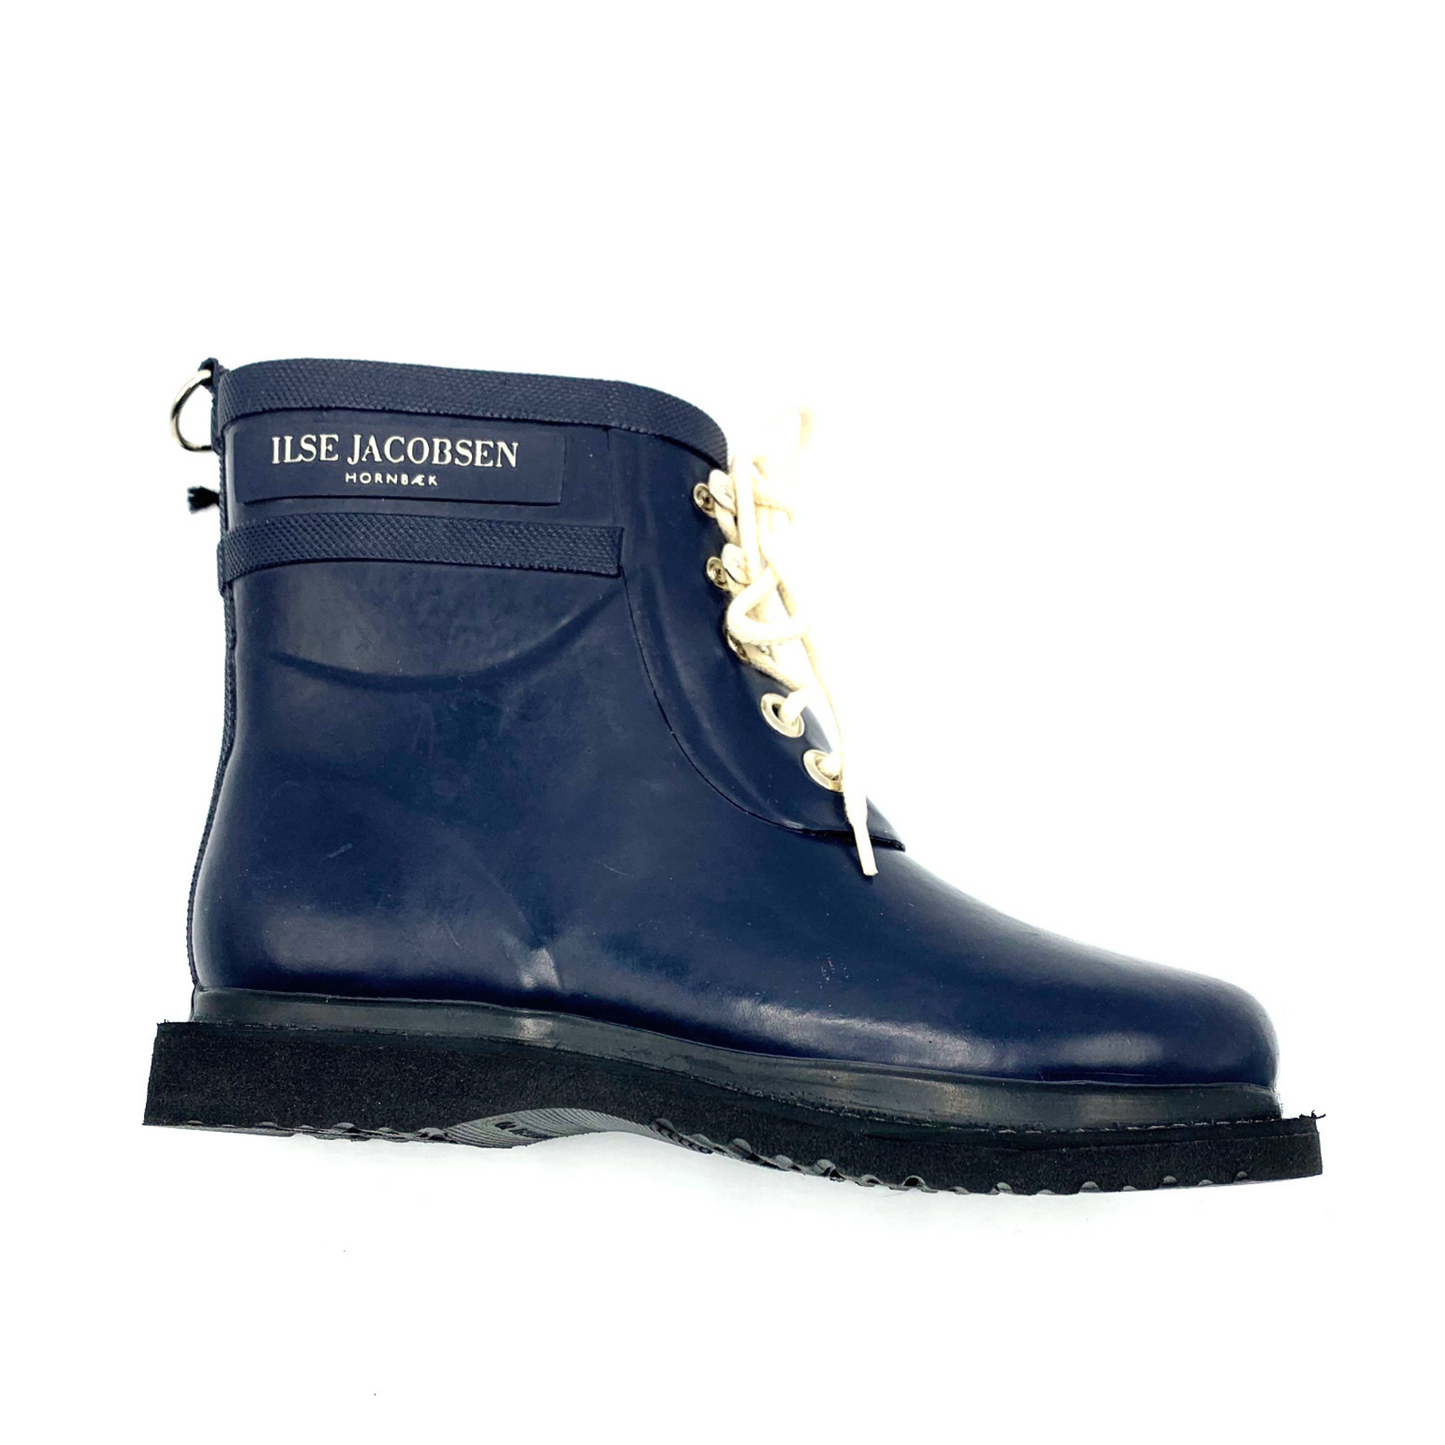 A right side view of a navy rain boot with black and white details.